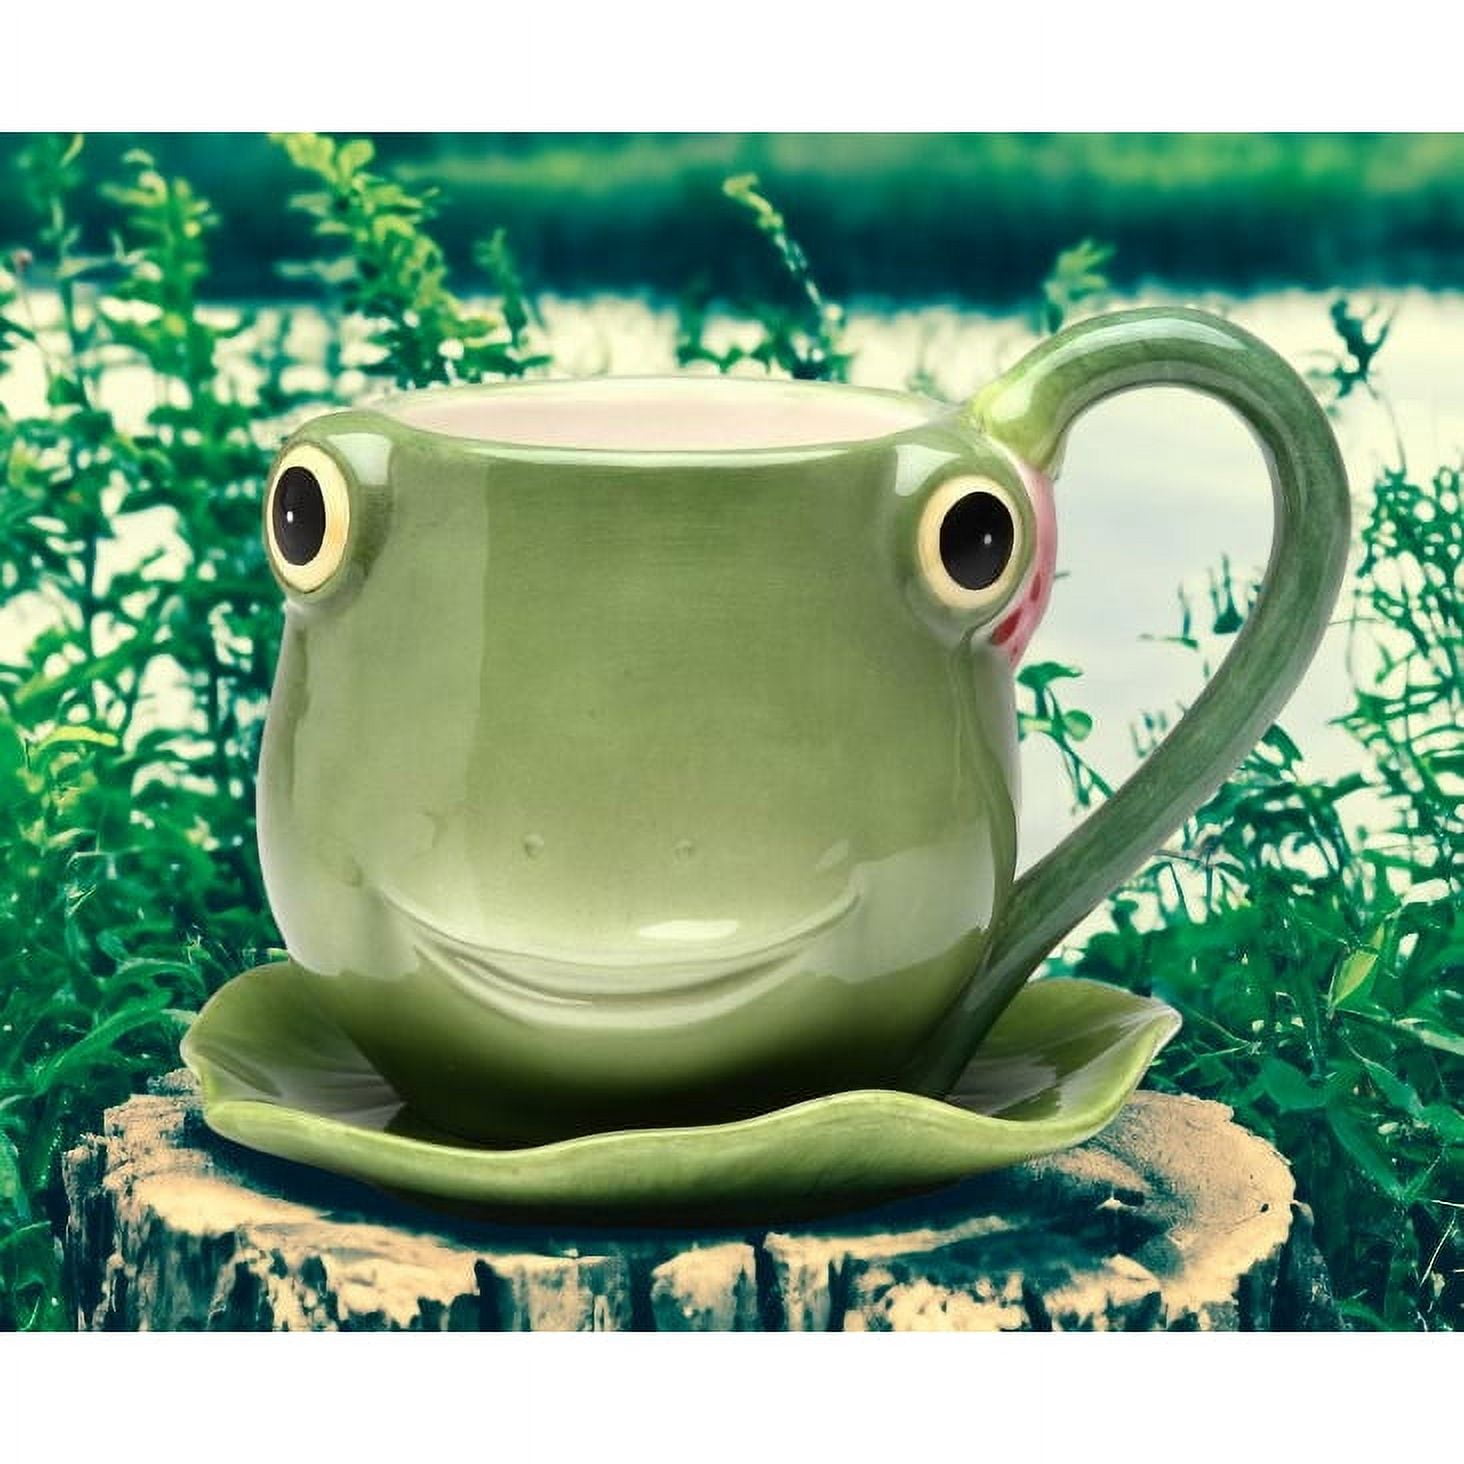 Ceramic Frog Cup and Saucer, Gift for Her, Gift for Mom, Gift for Friend or  Coworker, Tea Party Décor, Café Decor